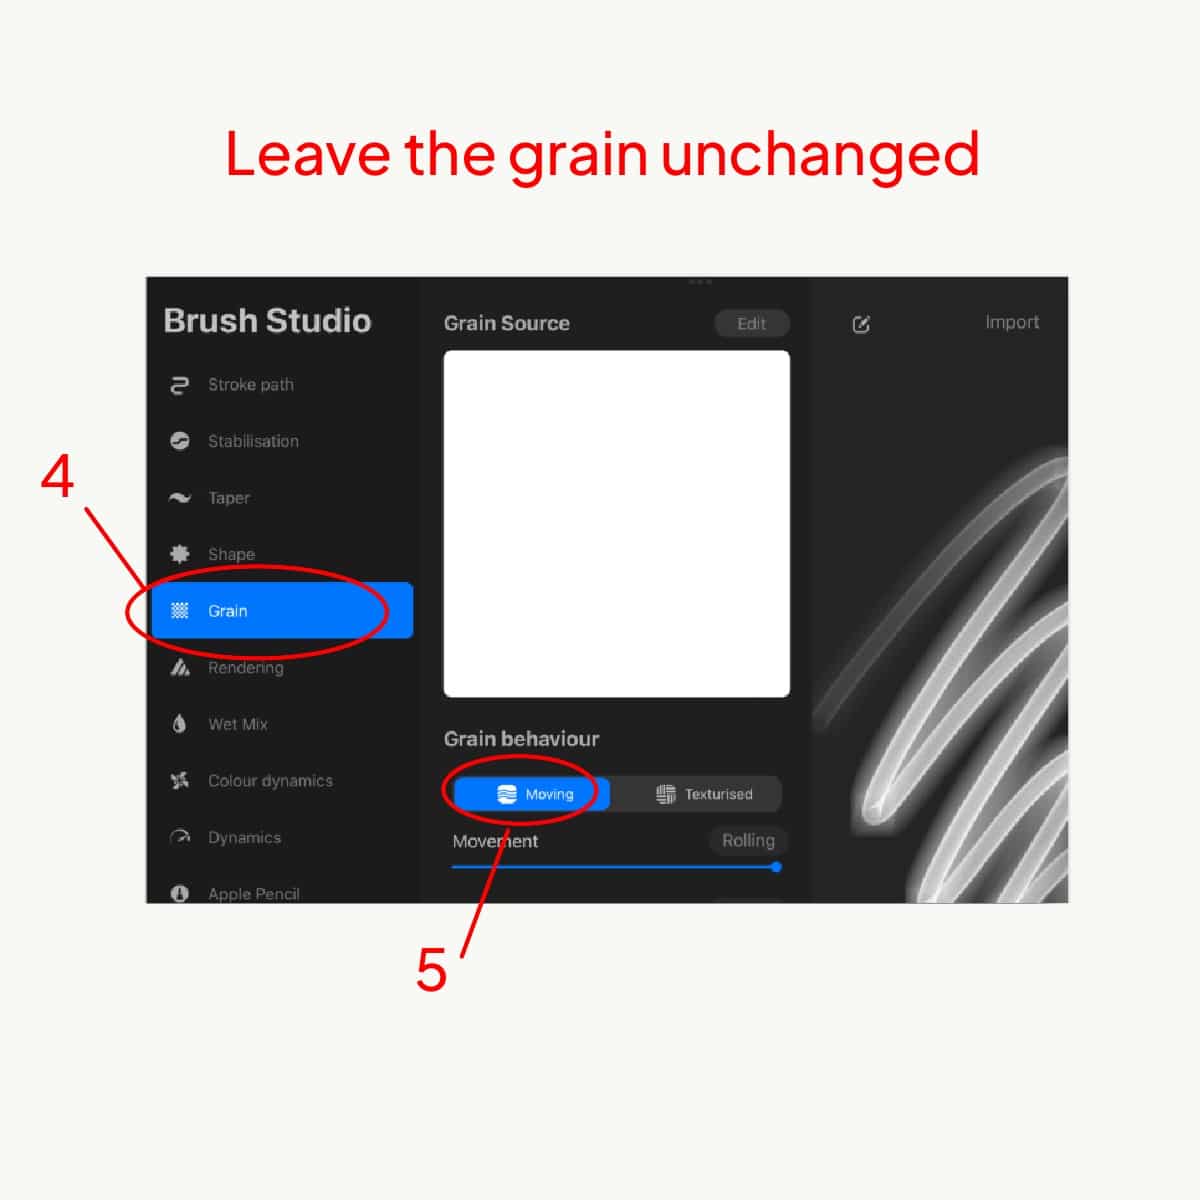 How To Make a Chain Brush In Procreate